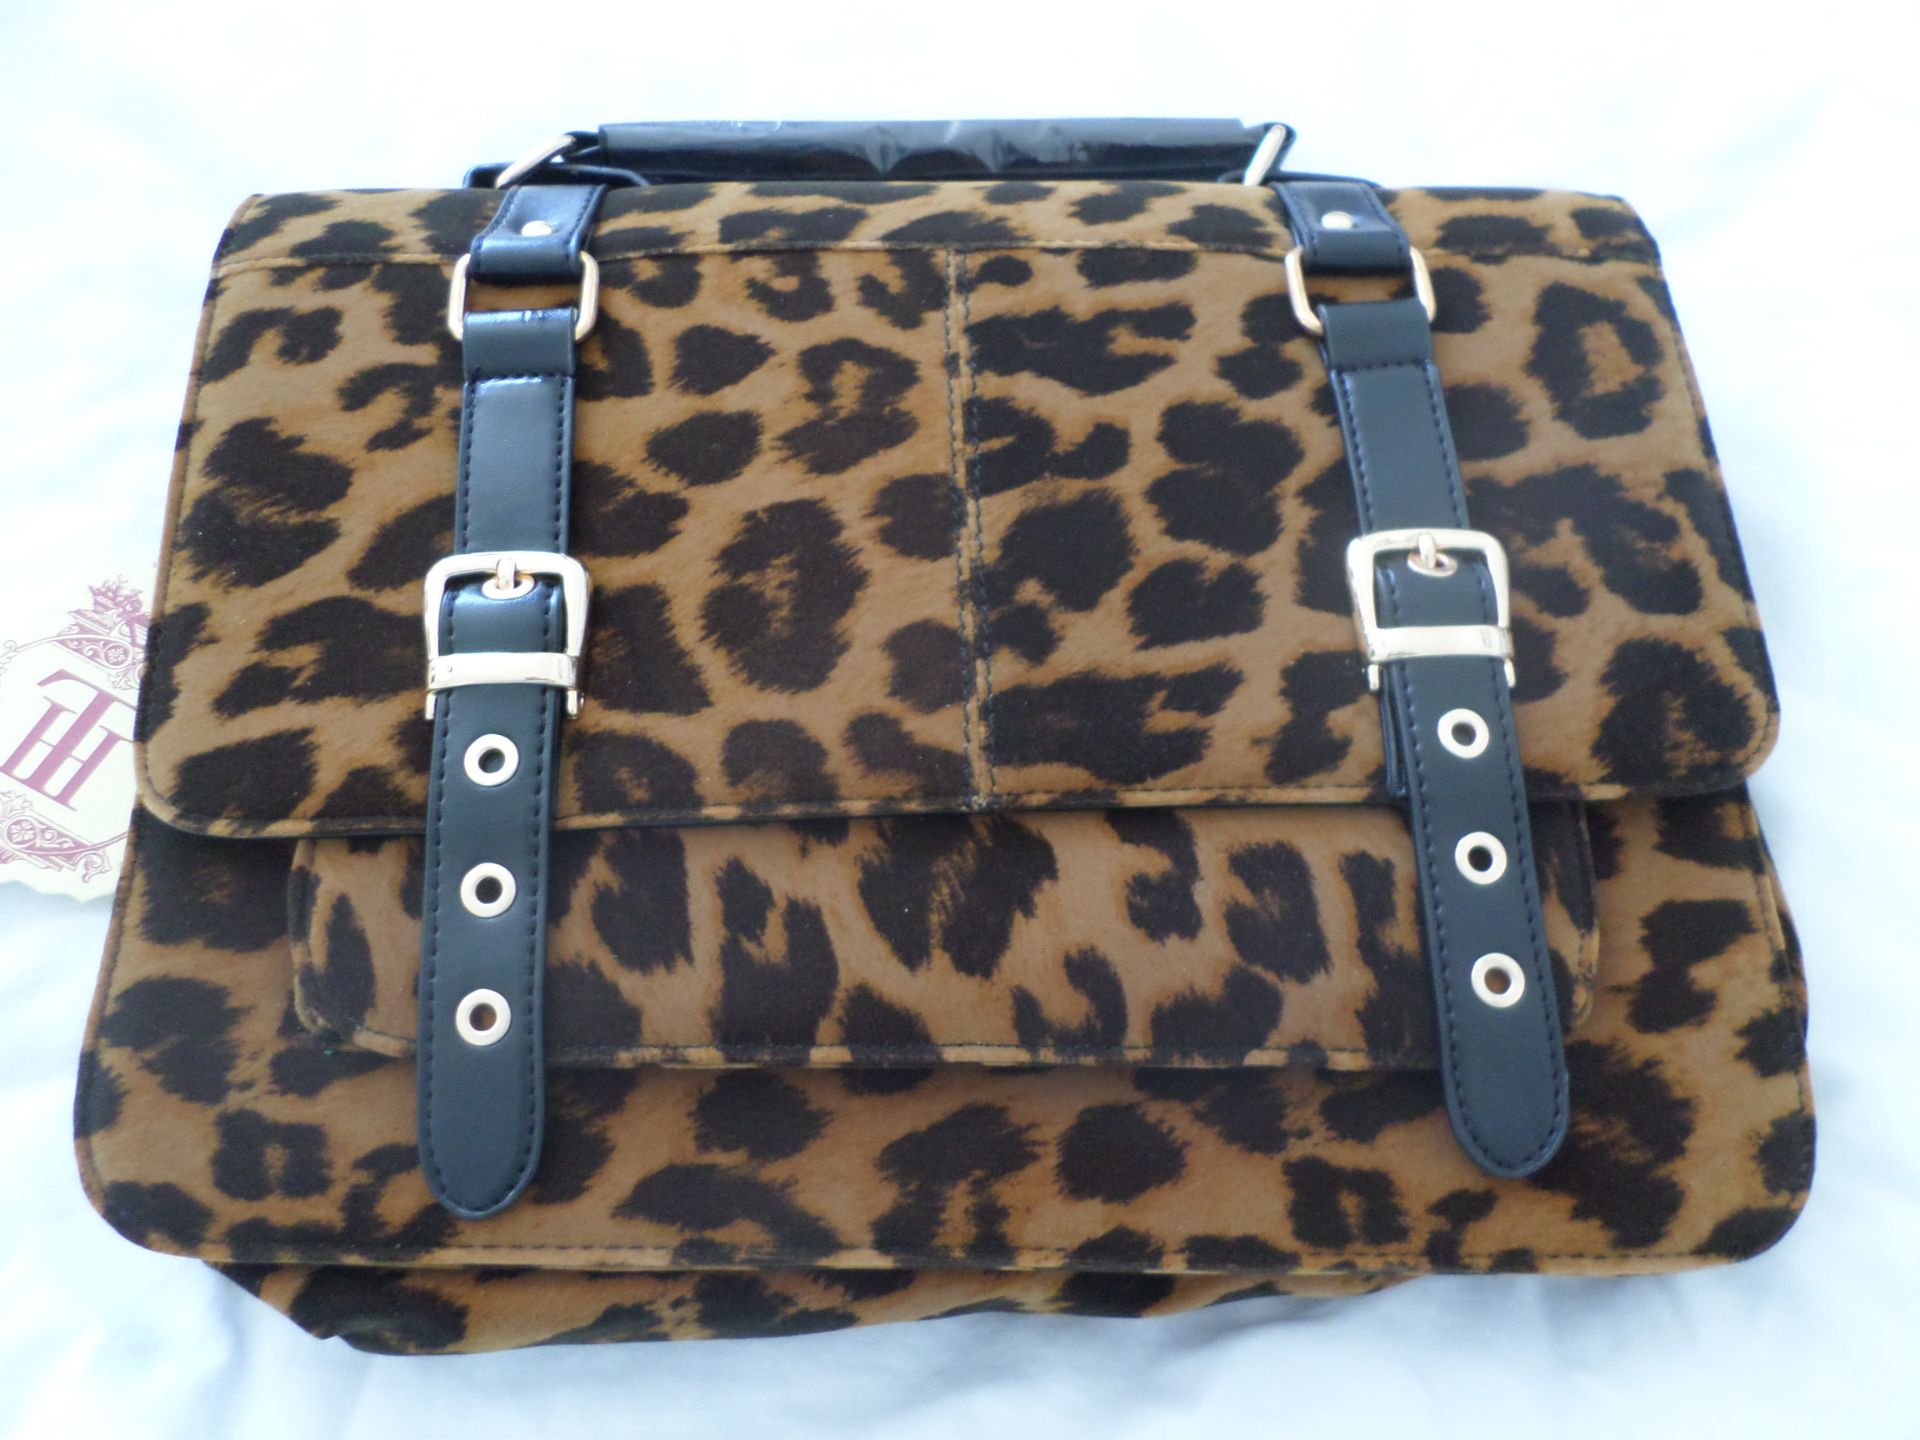 Brand New Ht London Large Satchel/Briefcase Leopard Print Rrp £29.99 - Image 2 of 5